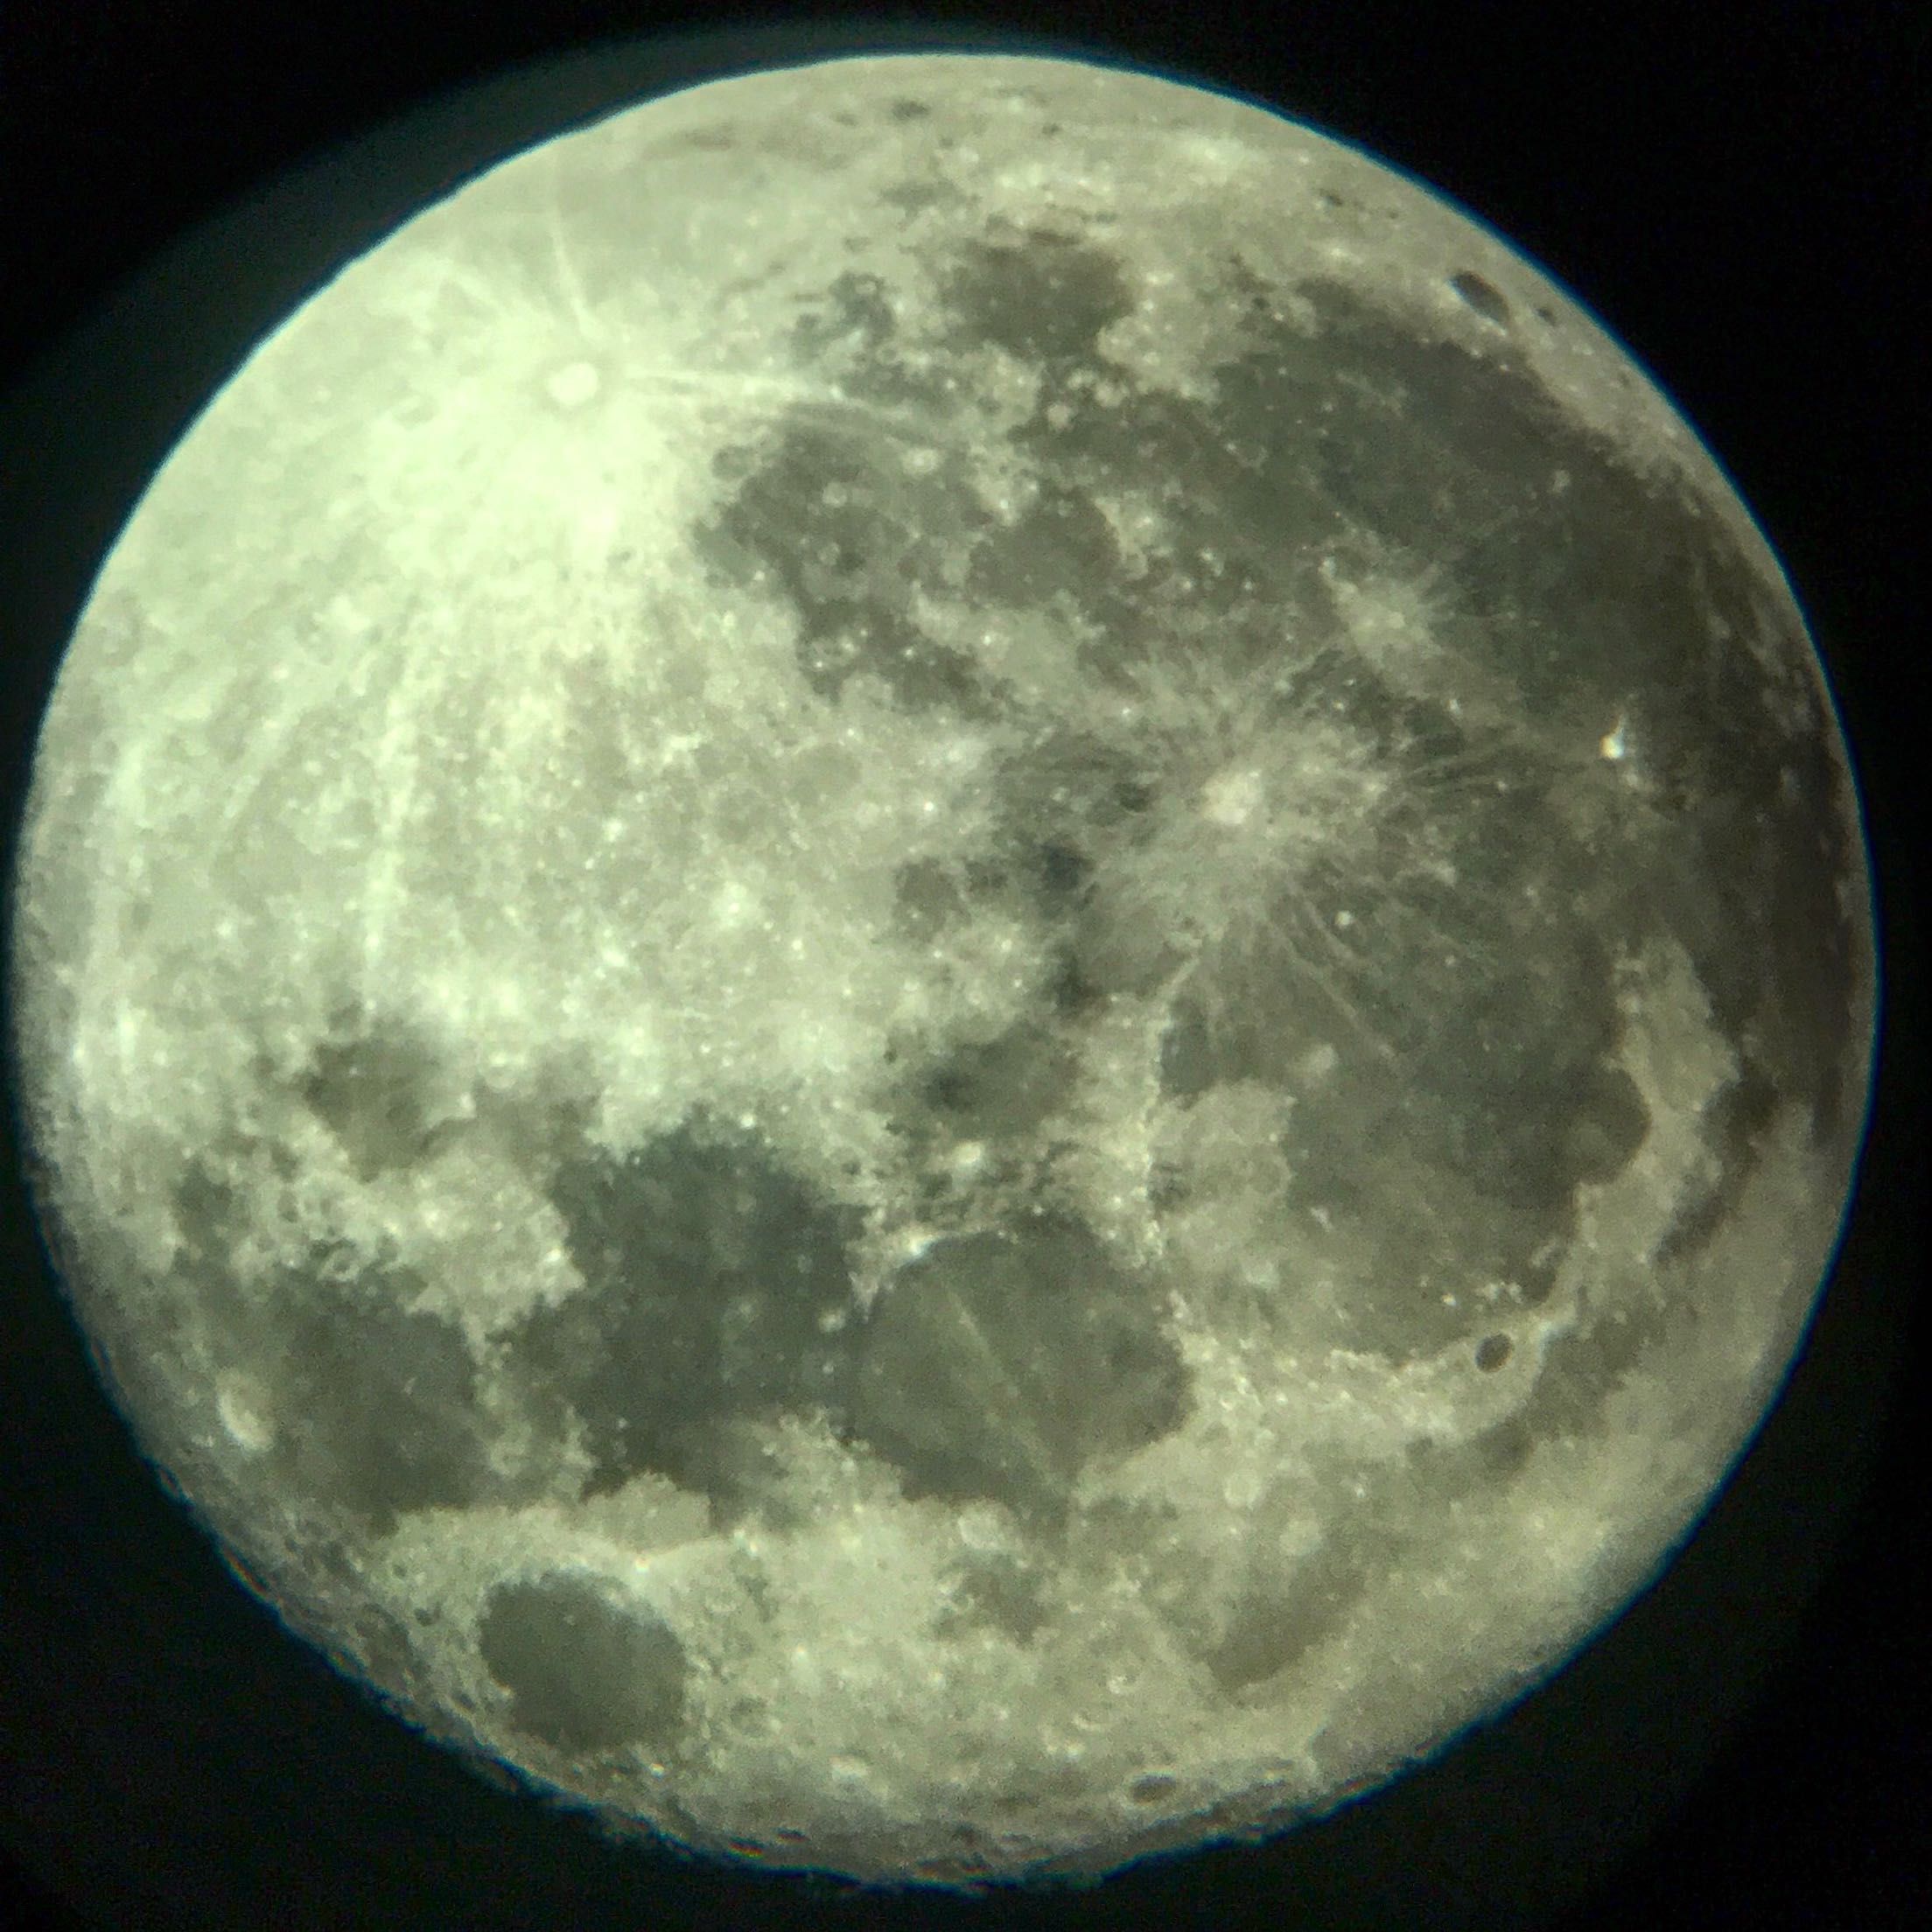 Picture I Took of the Supermoon Tonight Through a Telescope